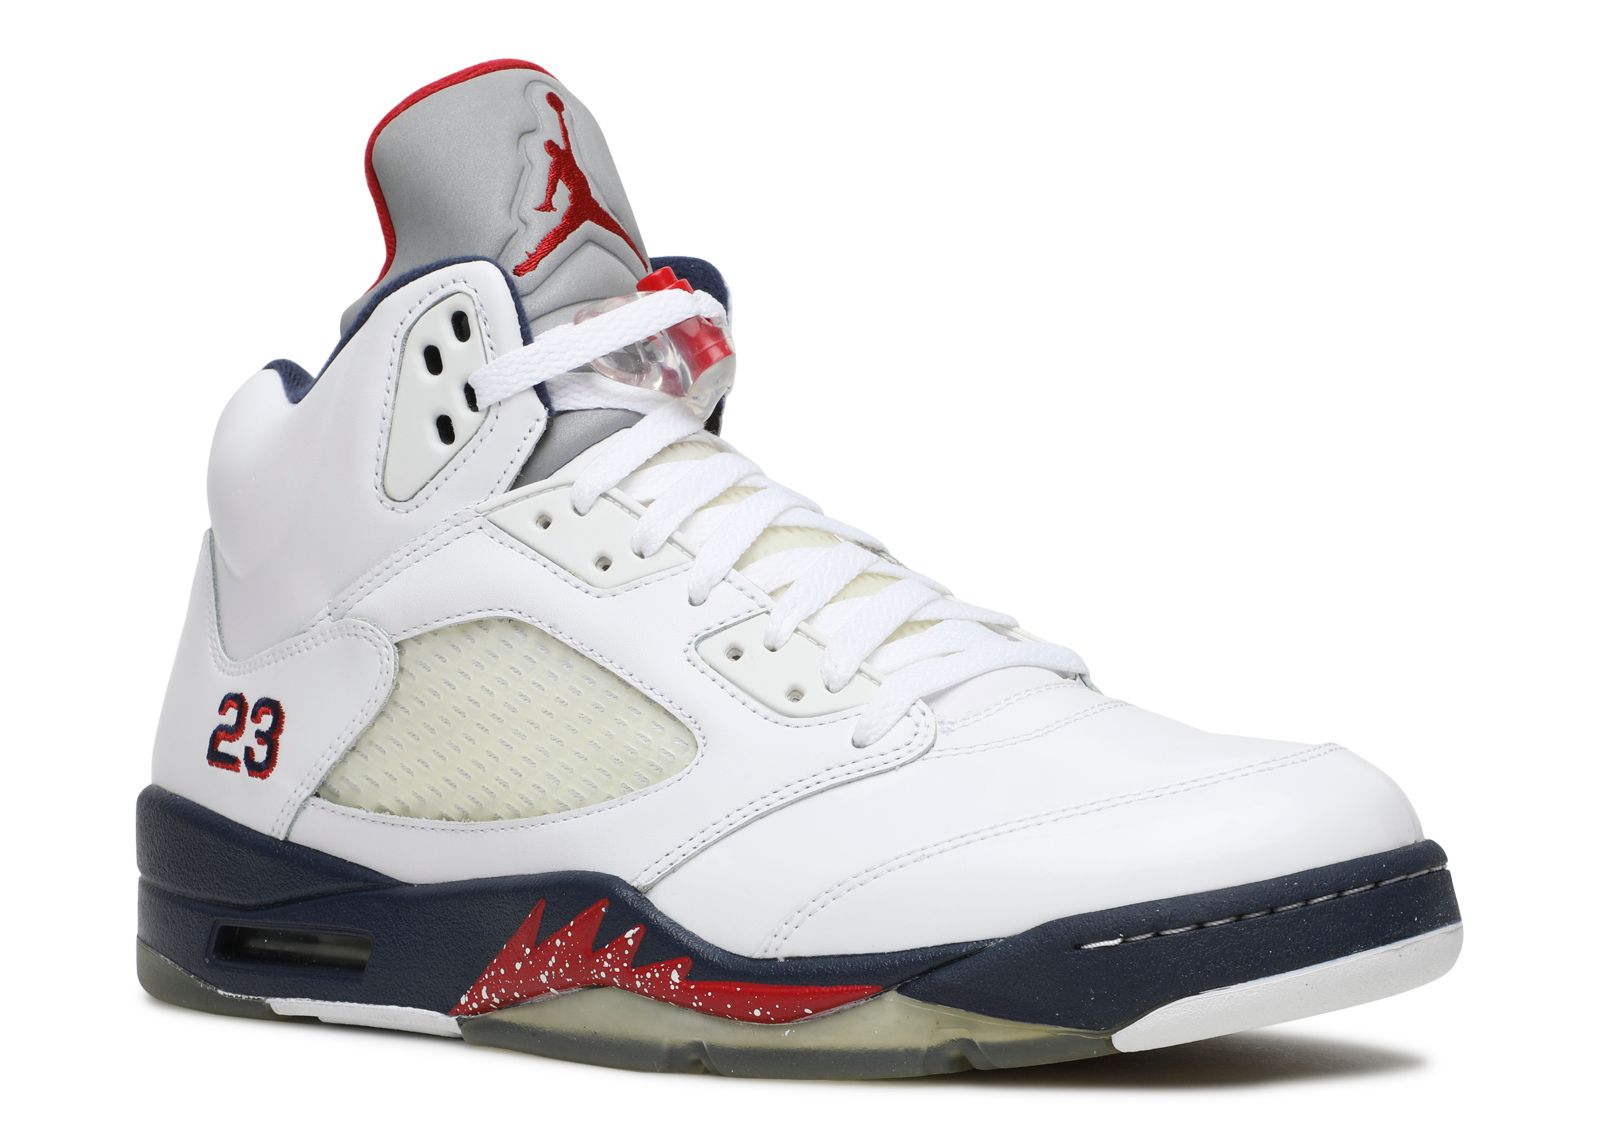 jordan 5 red white and blue